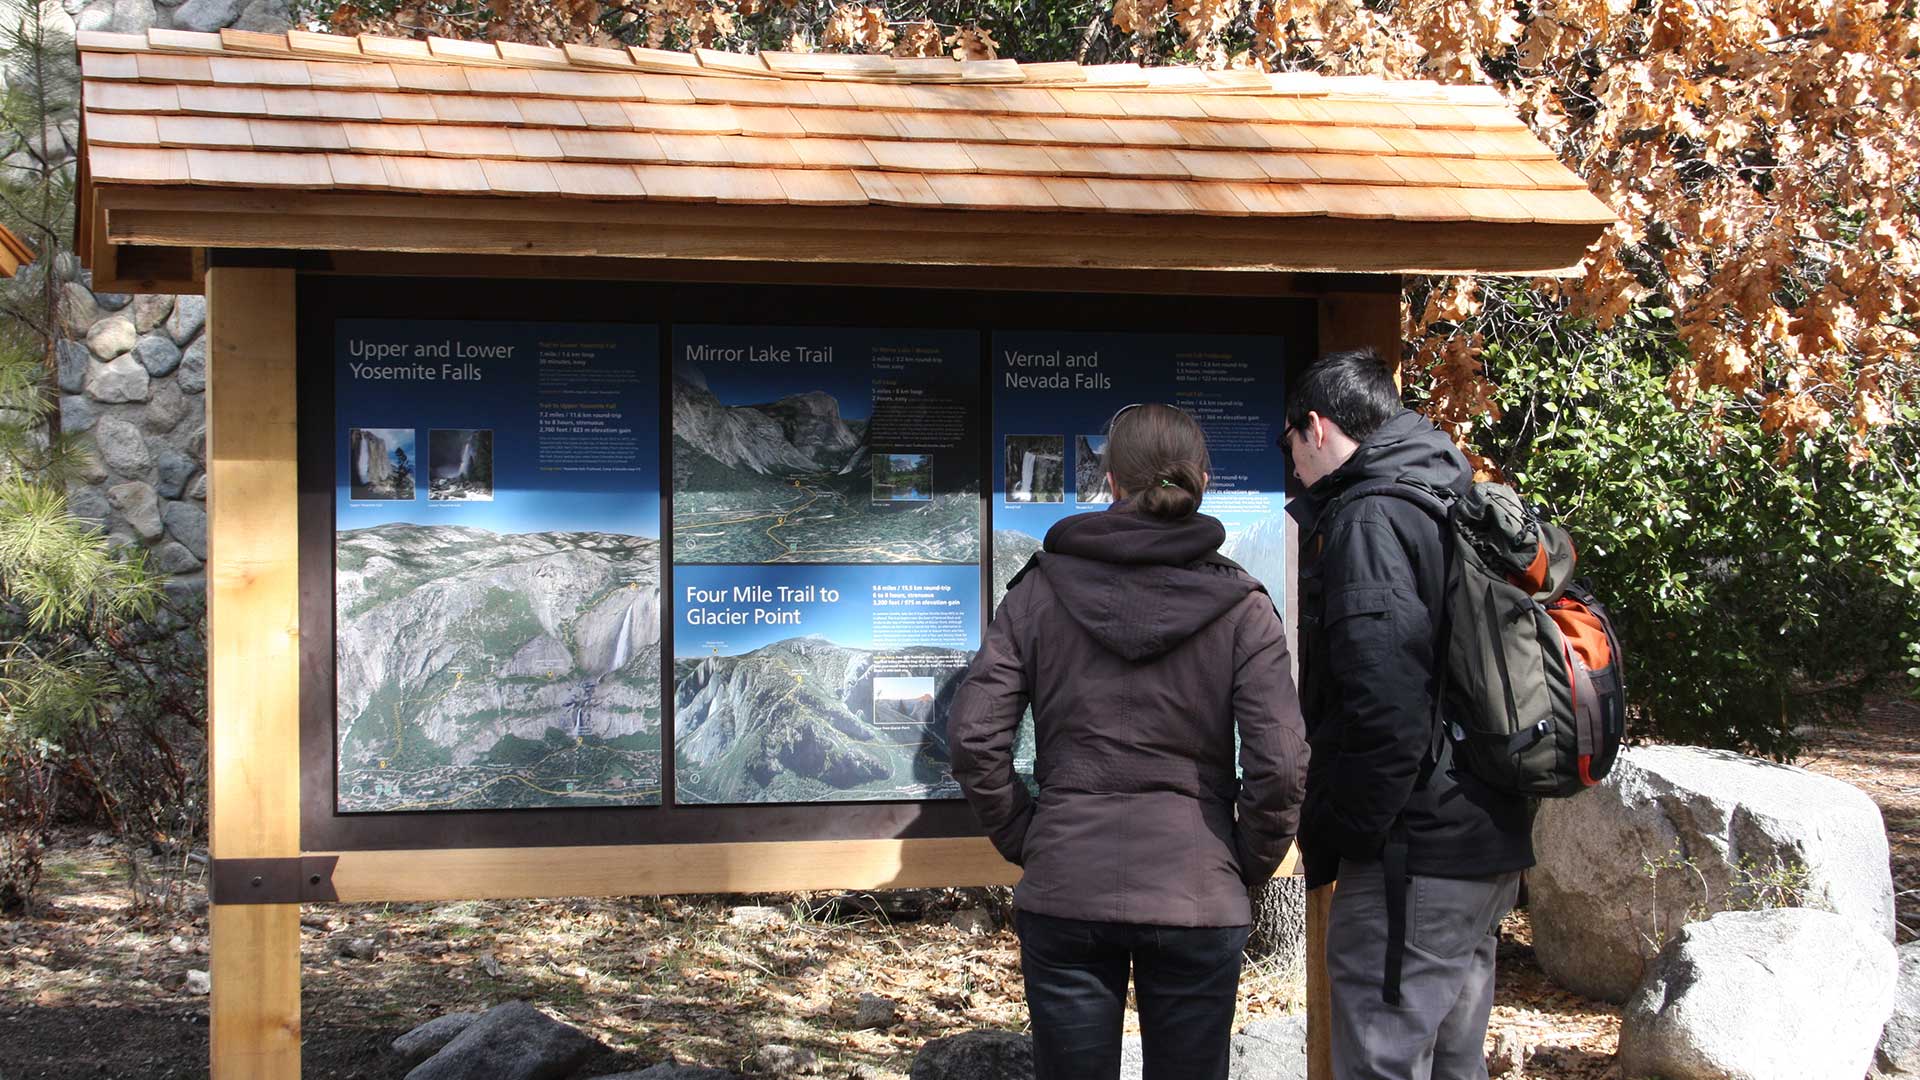 Interpretive signs on display in front of the Yosemite Valley Visitor Center